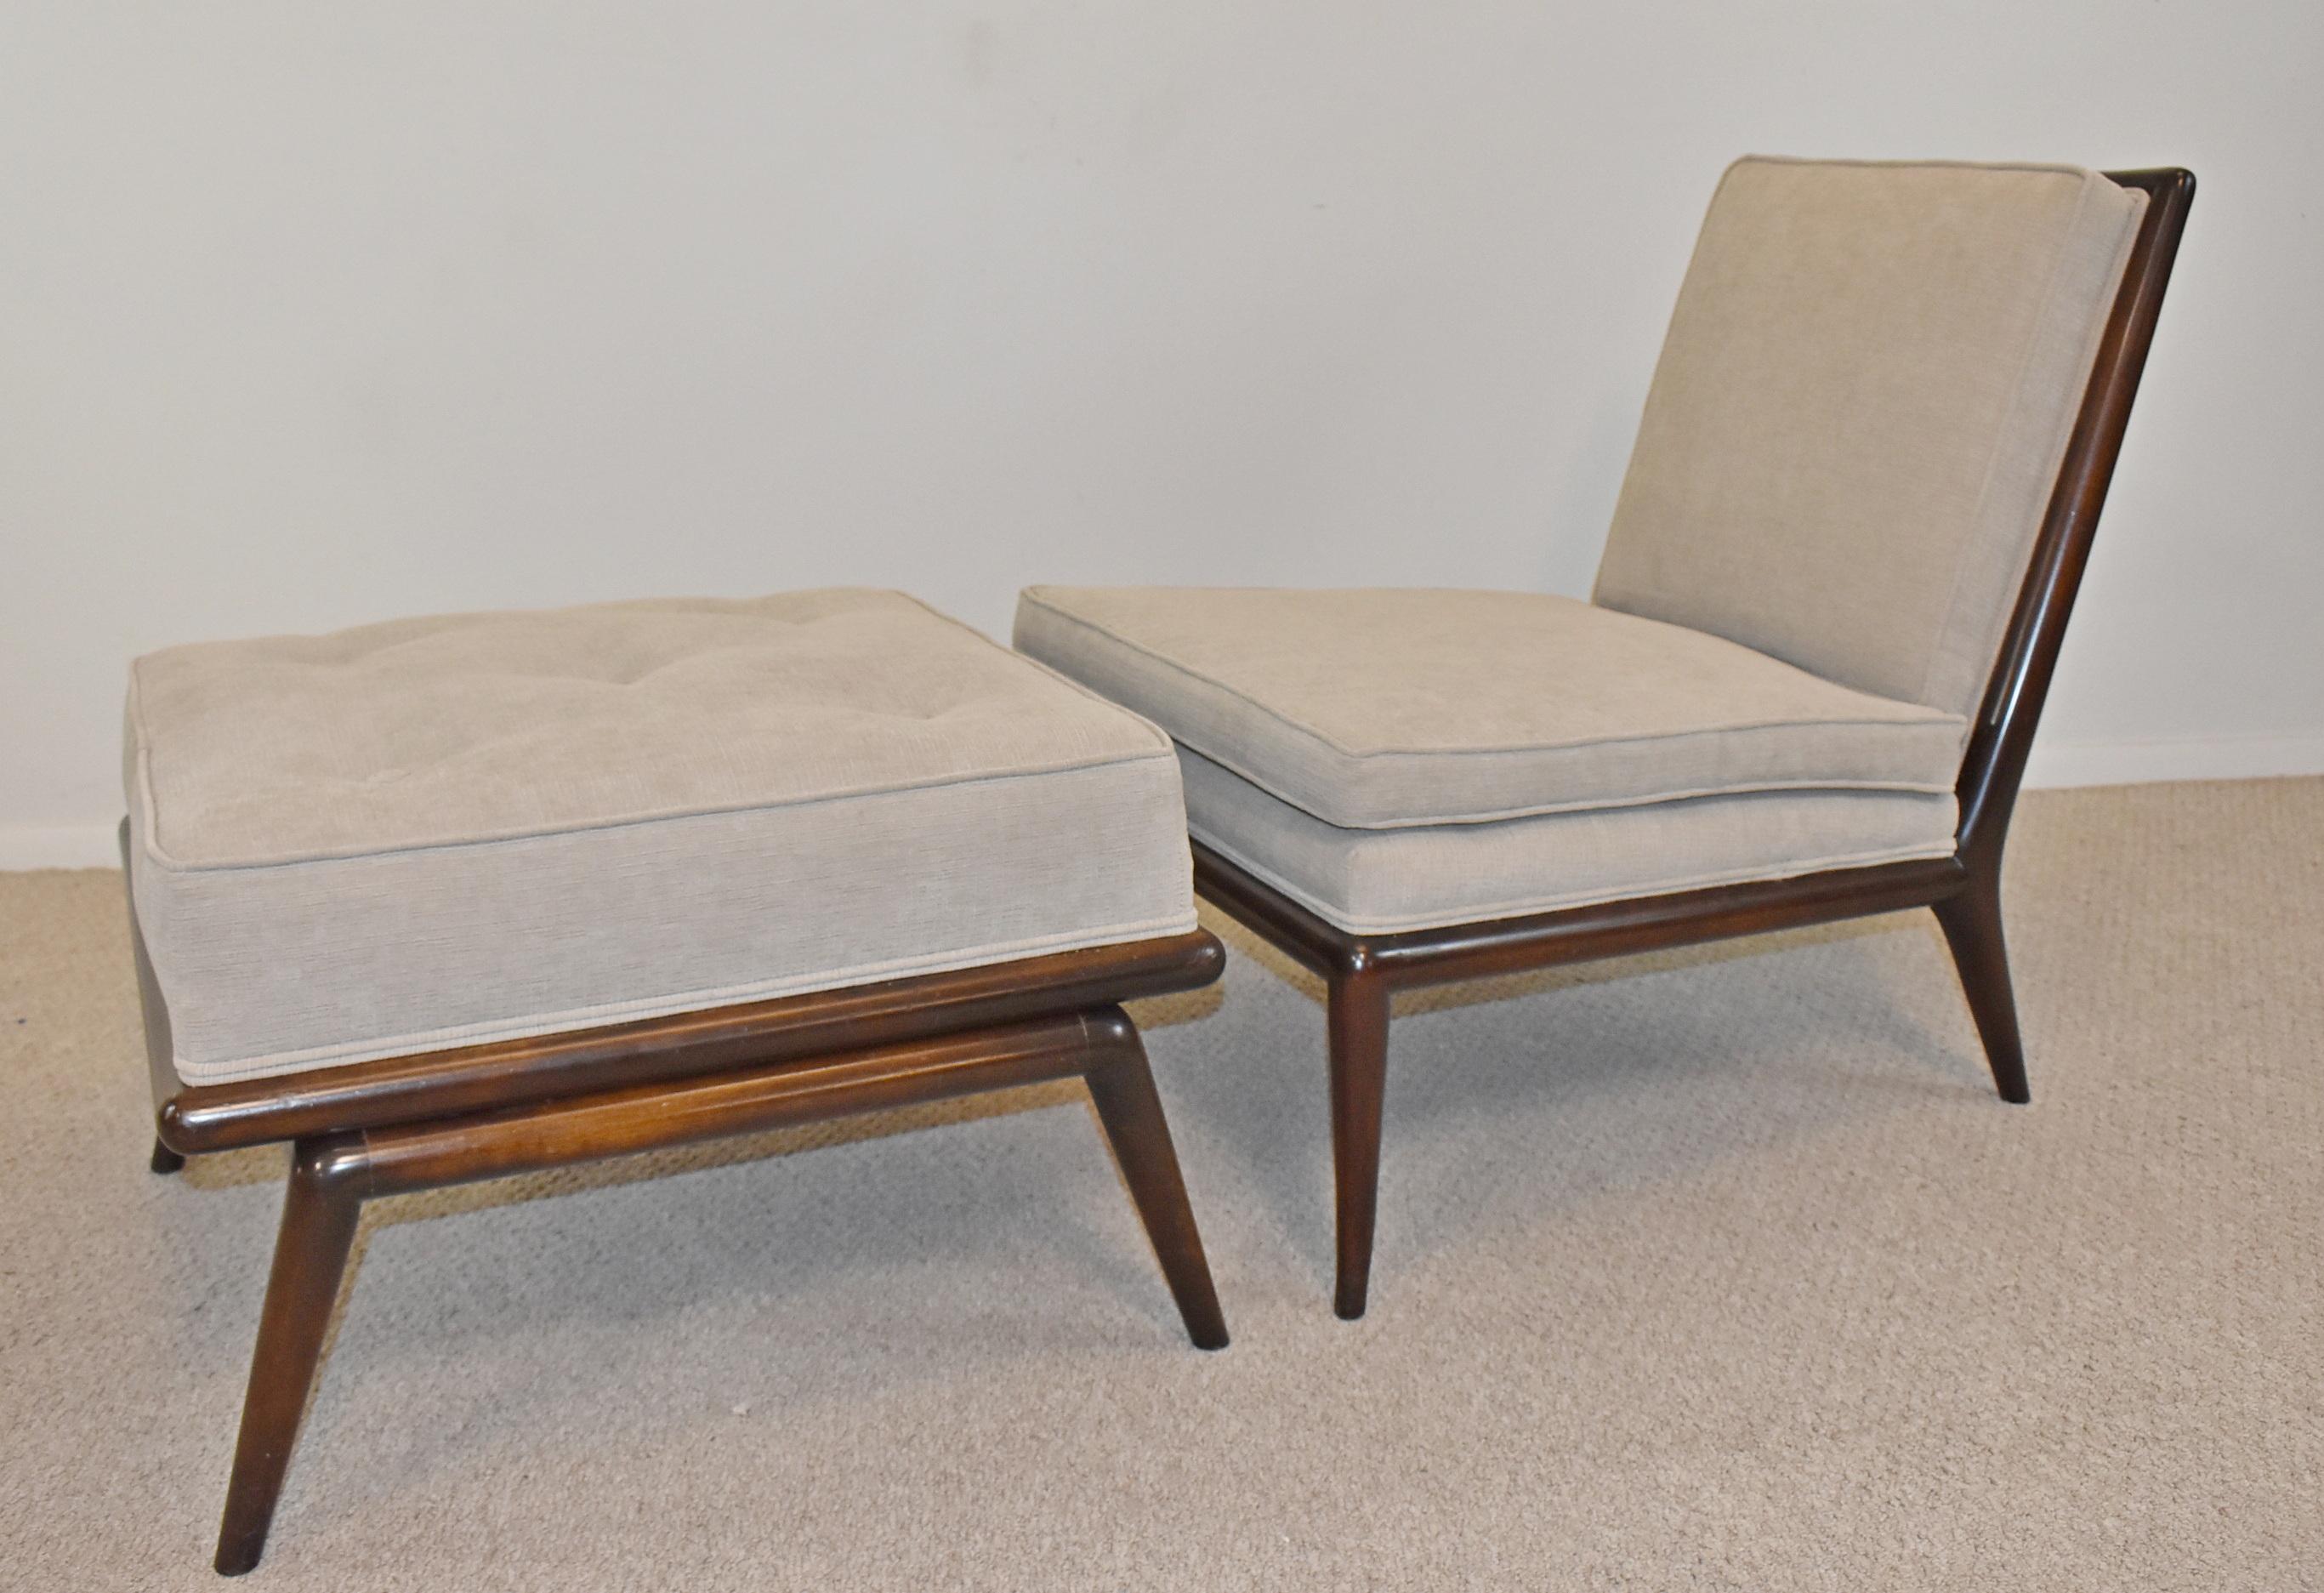 T.H. Robsjohn-Gibbings chair and ottoman for Widdicomb Furniture. T.H. Robsjohn-Gibbings (1905-1976) produced and understated a line of modernist furnings for Widdicomb from 1943 to 1956. Mid-Century Modern newly recovered light grey textured